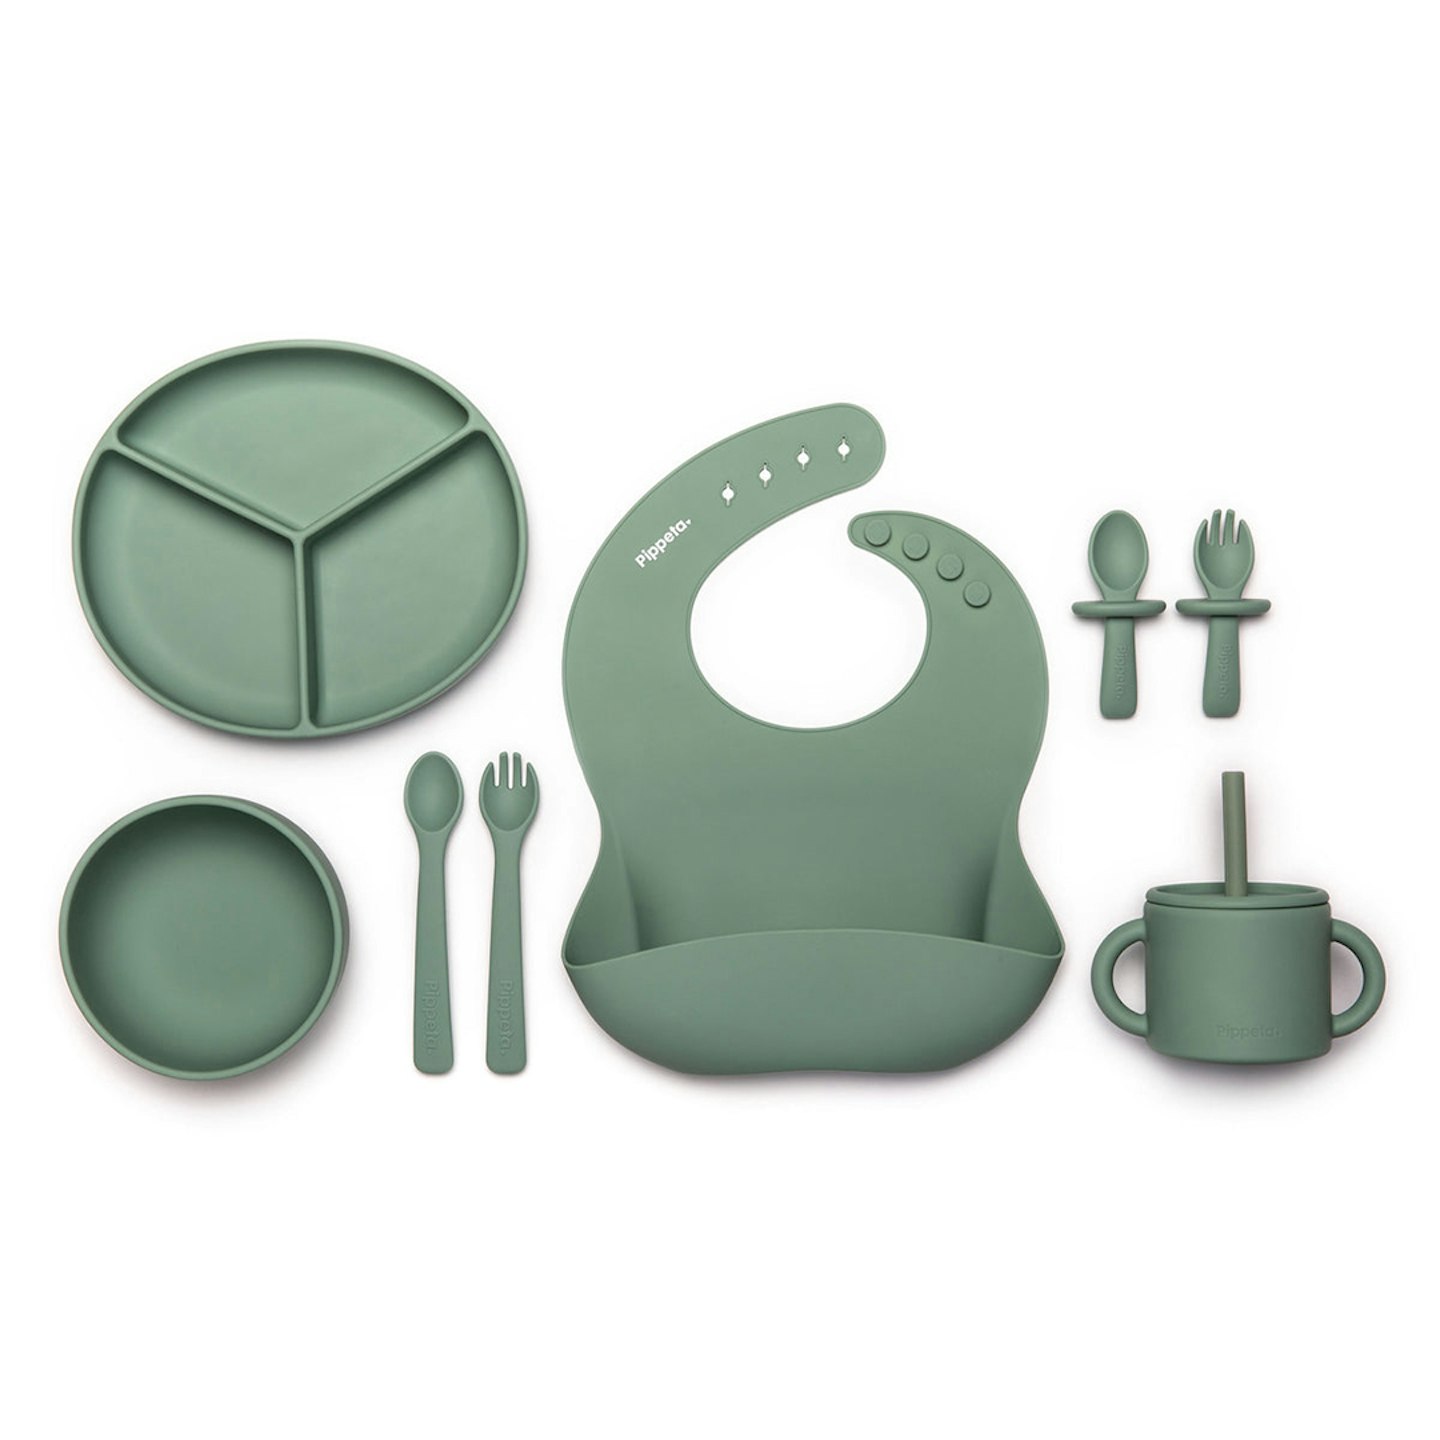 Pippeta Ultimate Weaning Set